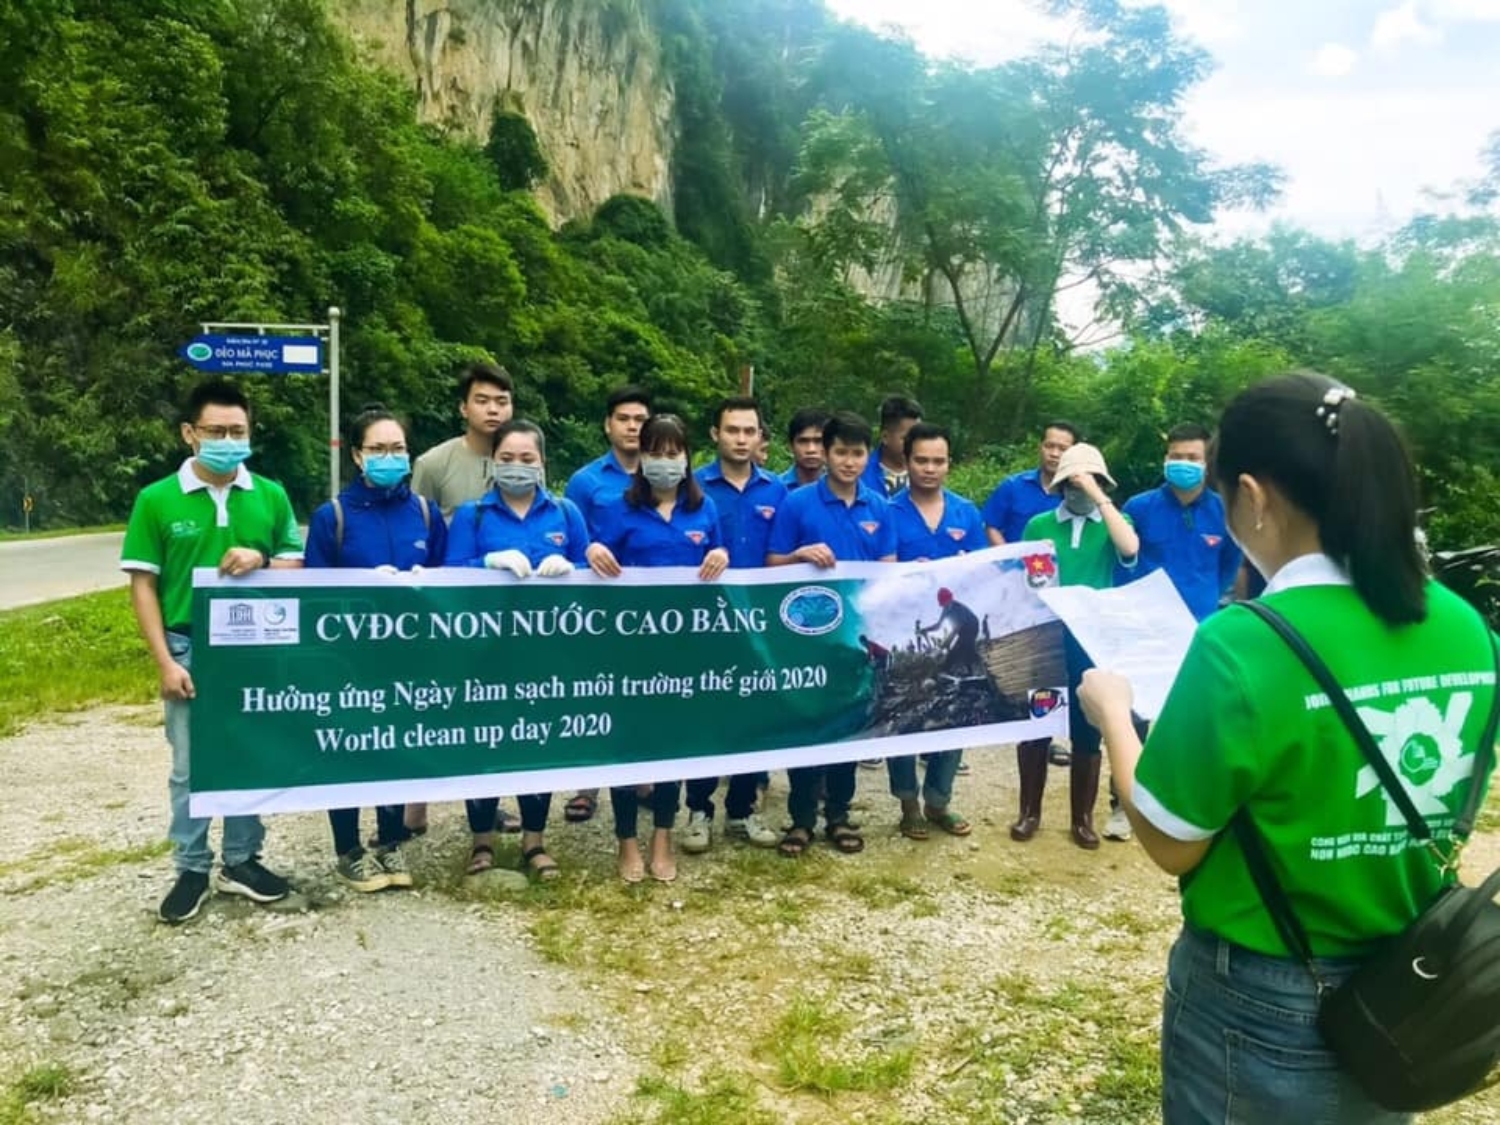 Non nuoc Cao Bang UGGp celebrate the world clean-up day 19/9